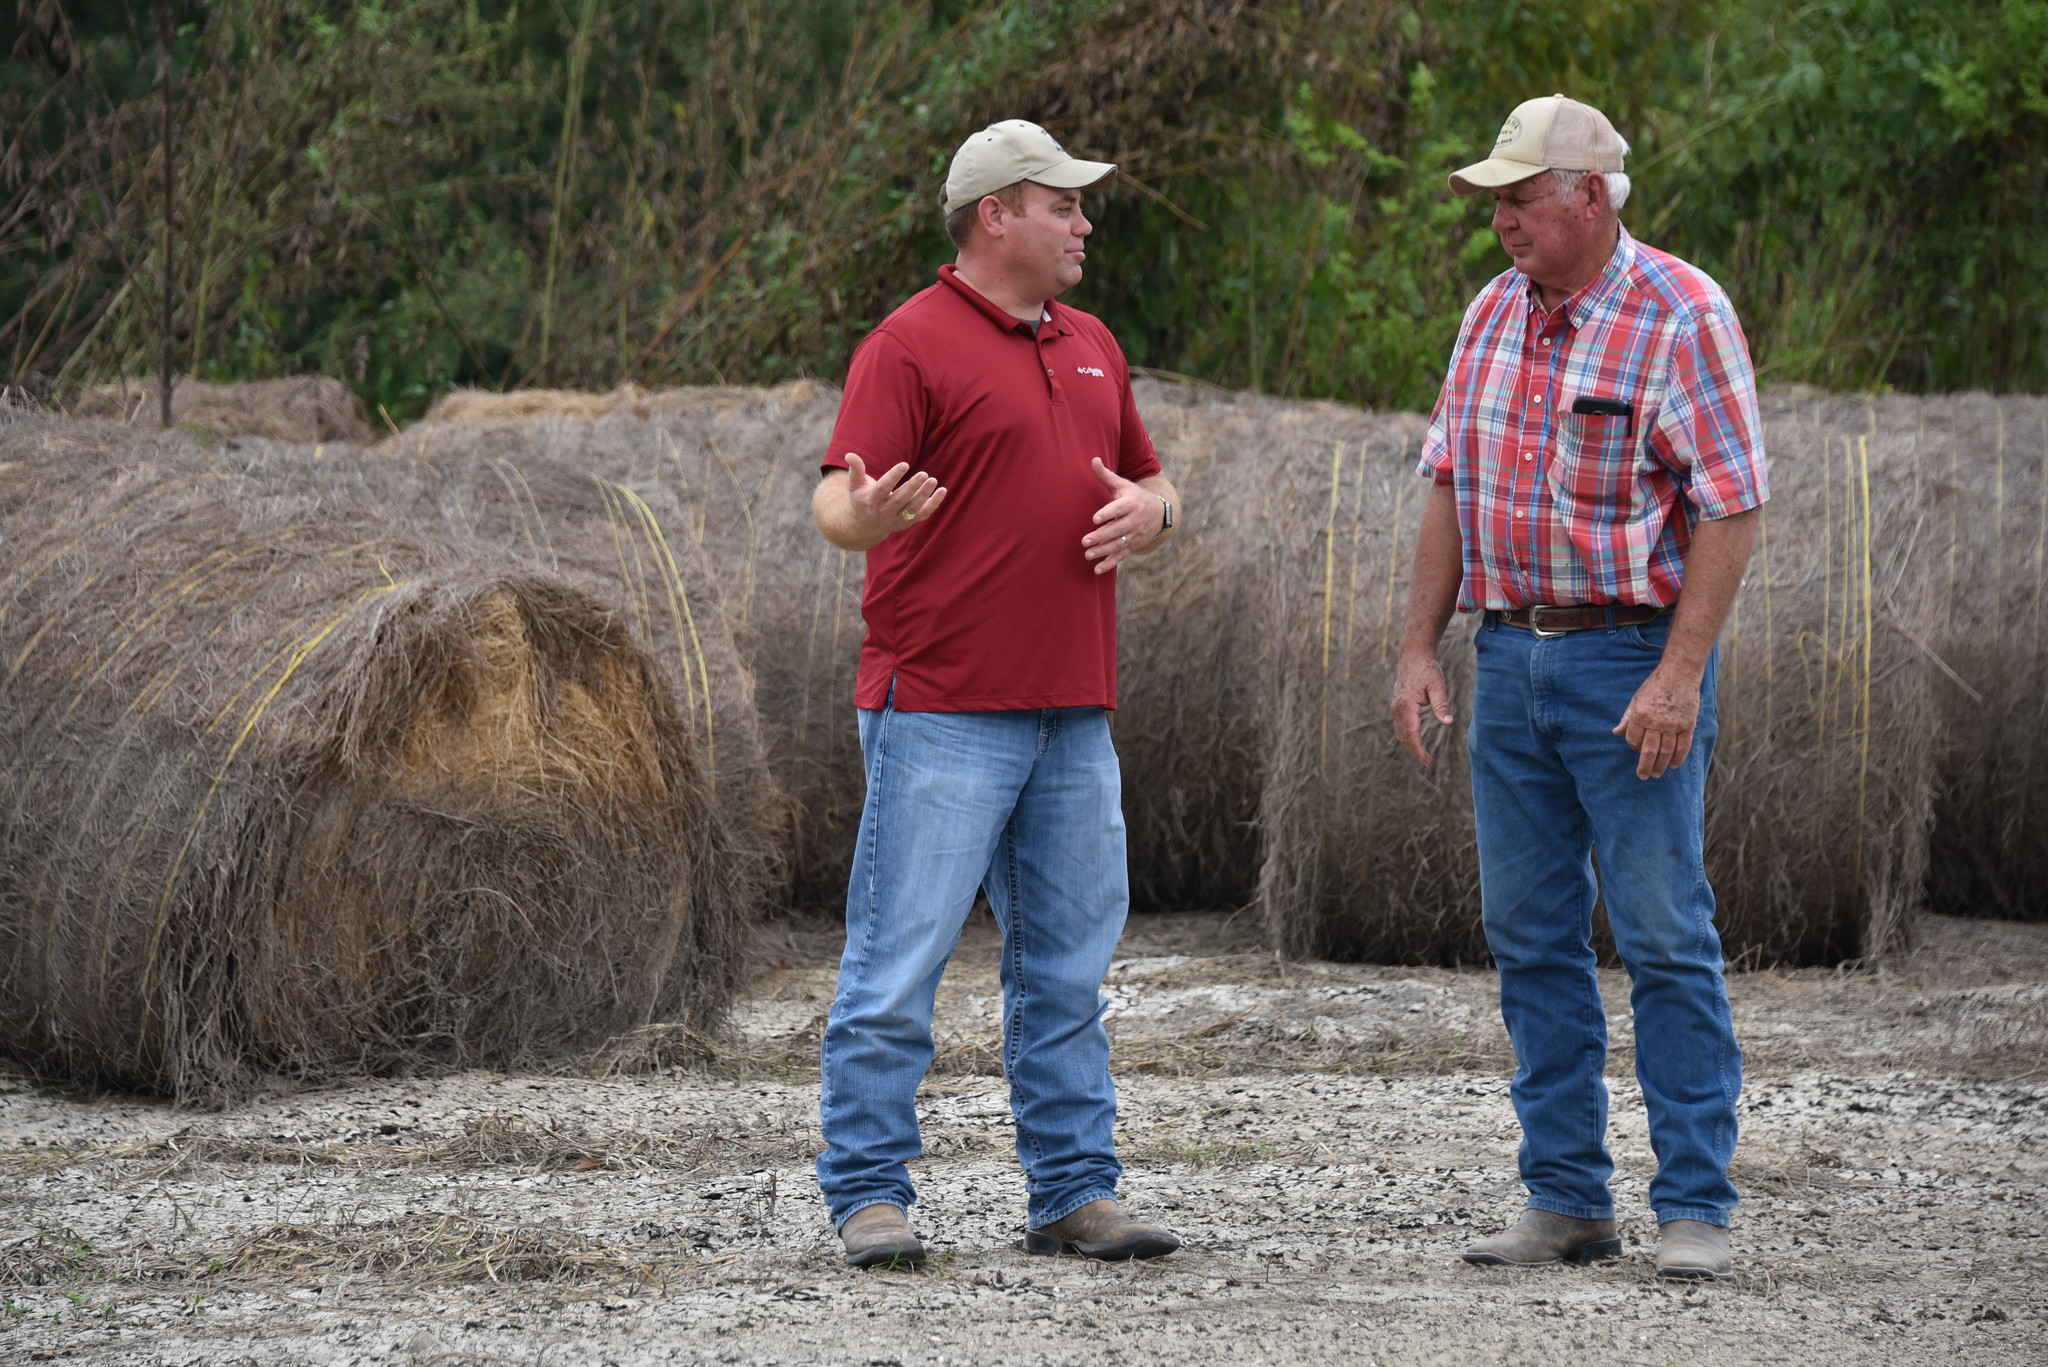 rancher and employee discussing an issue near hay bales